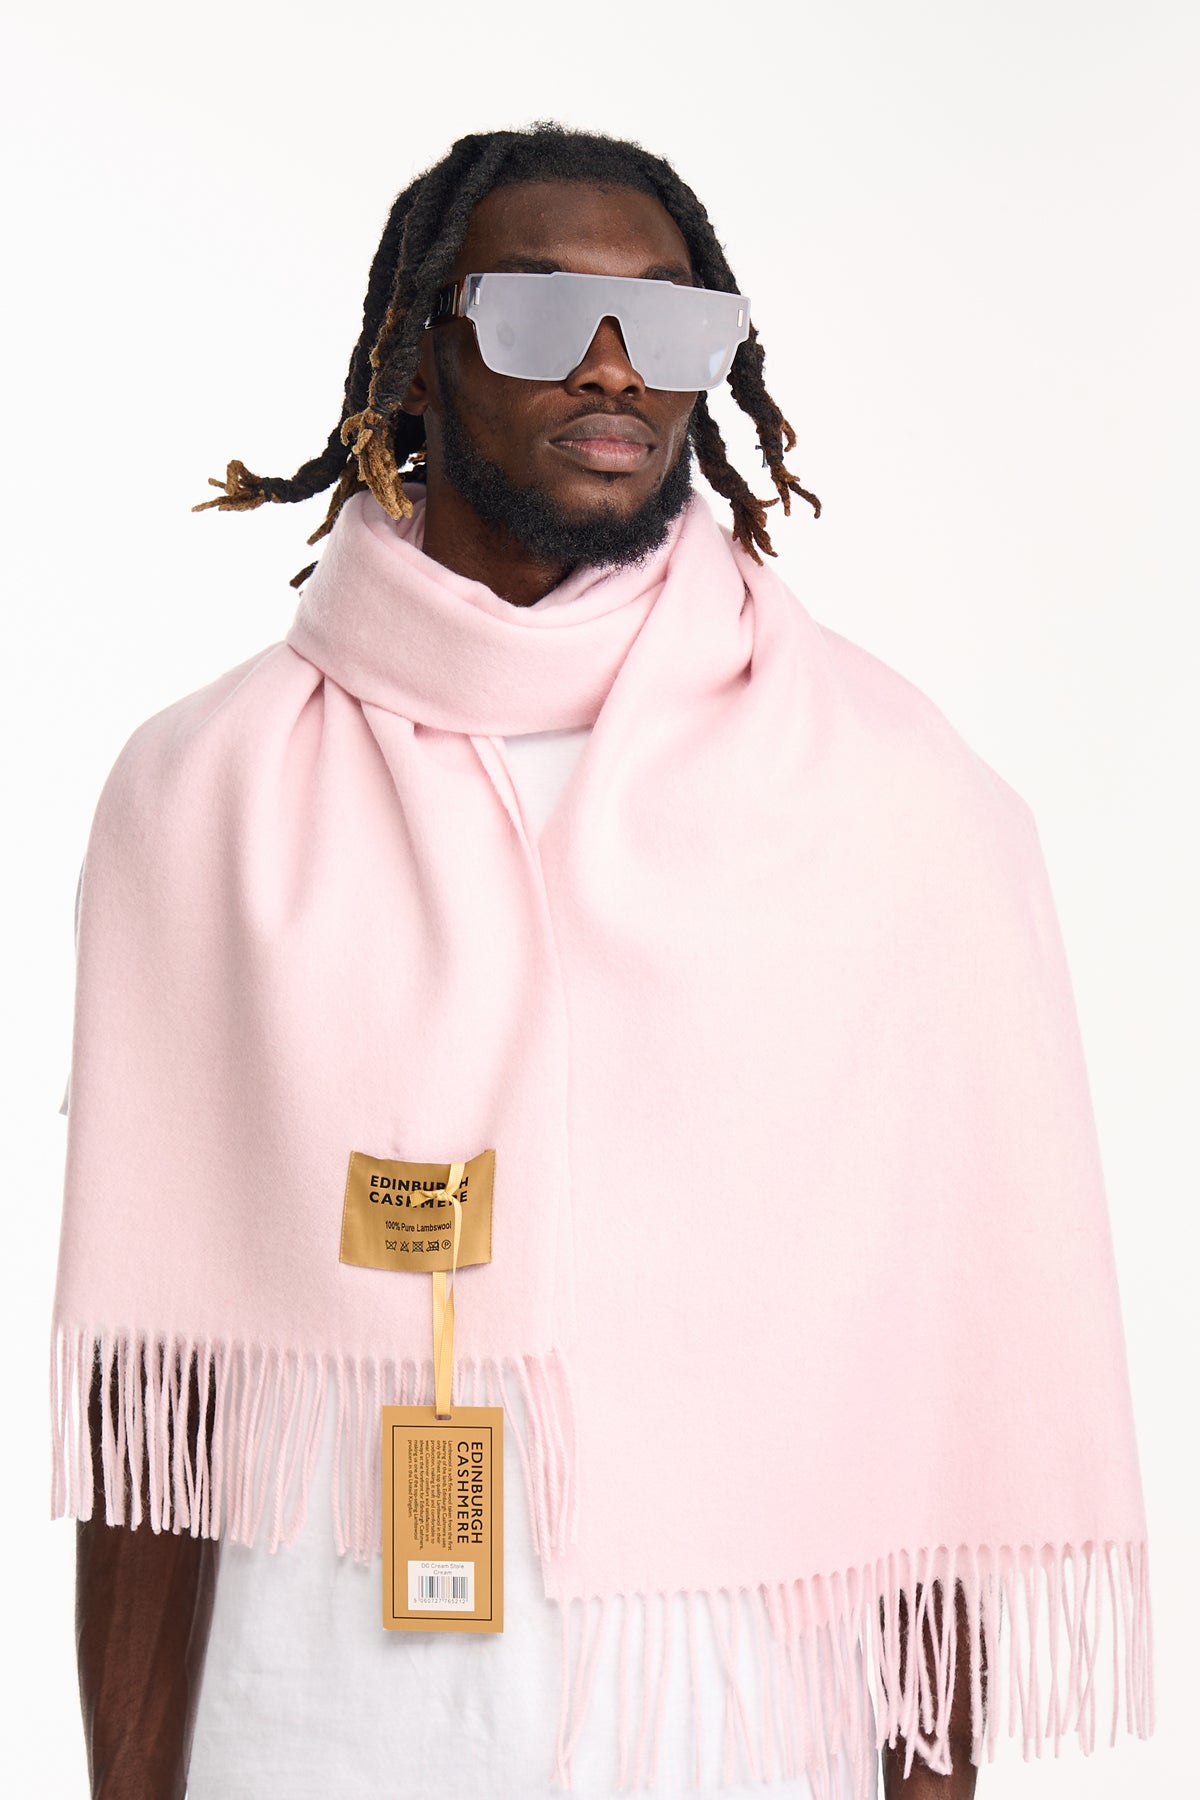 Plain Scarf Light Pink Oversized Wrap 100% Pure Lambswool